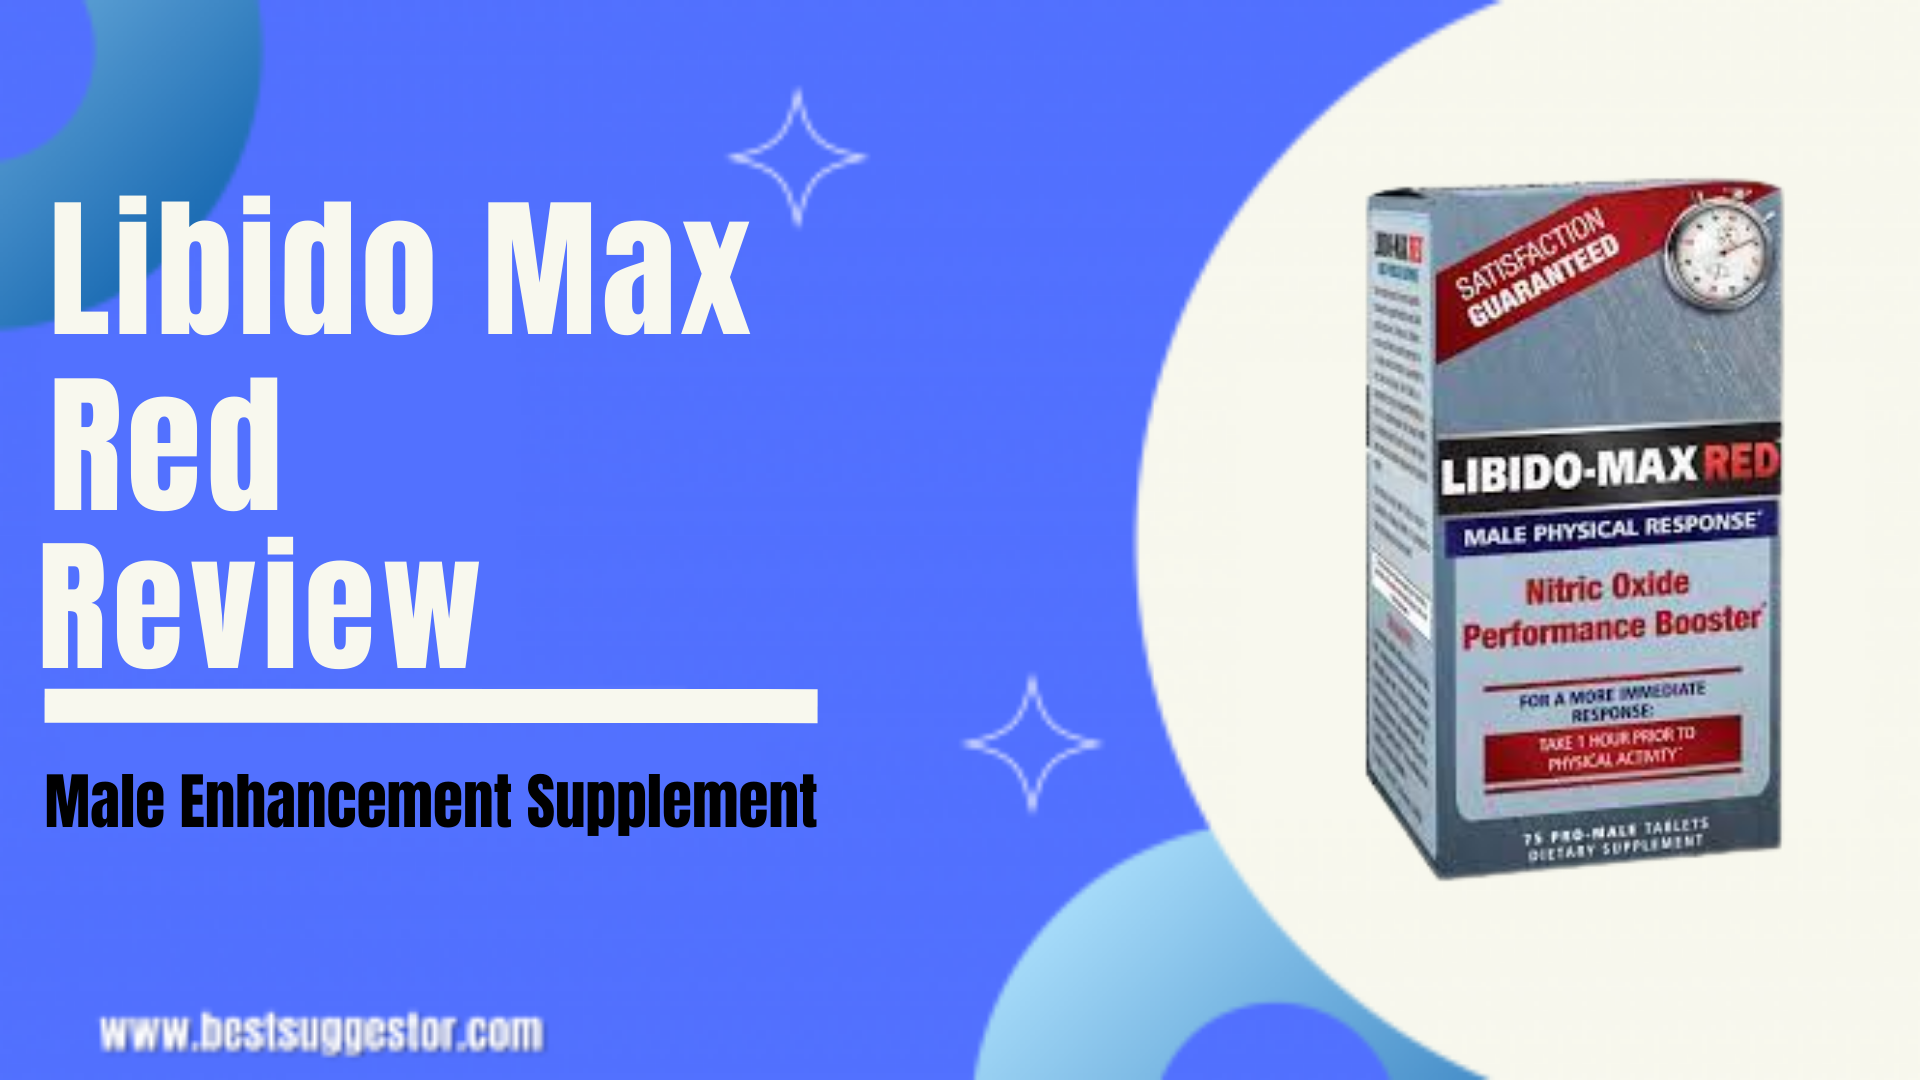 Libido-Max RED sexual performance pill